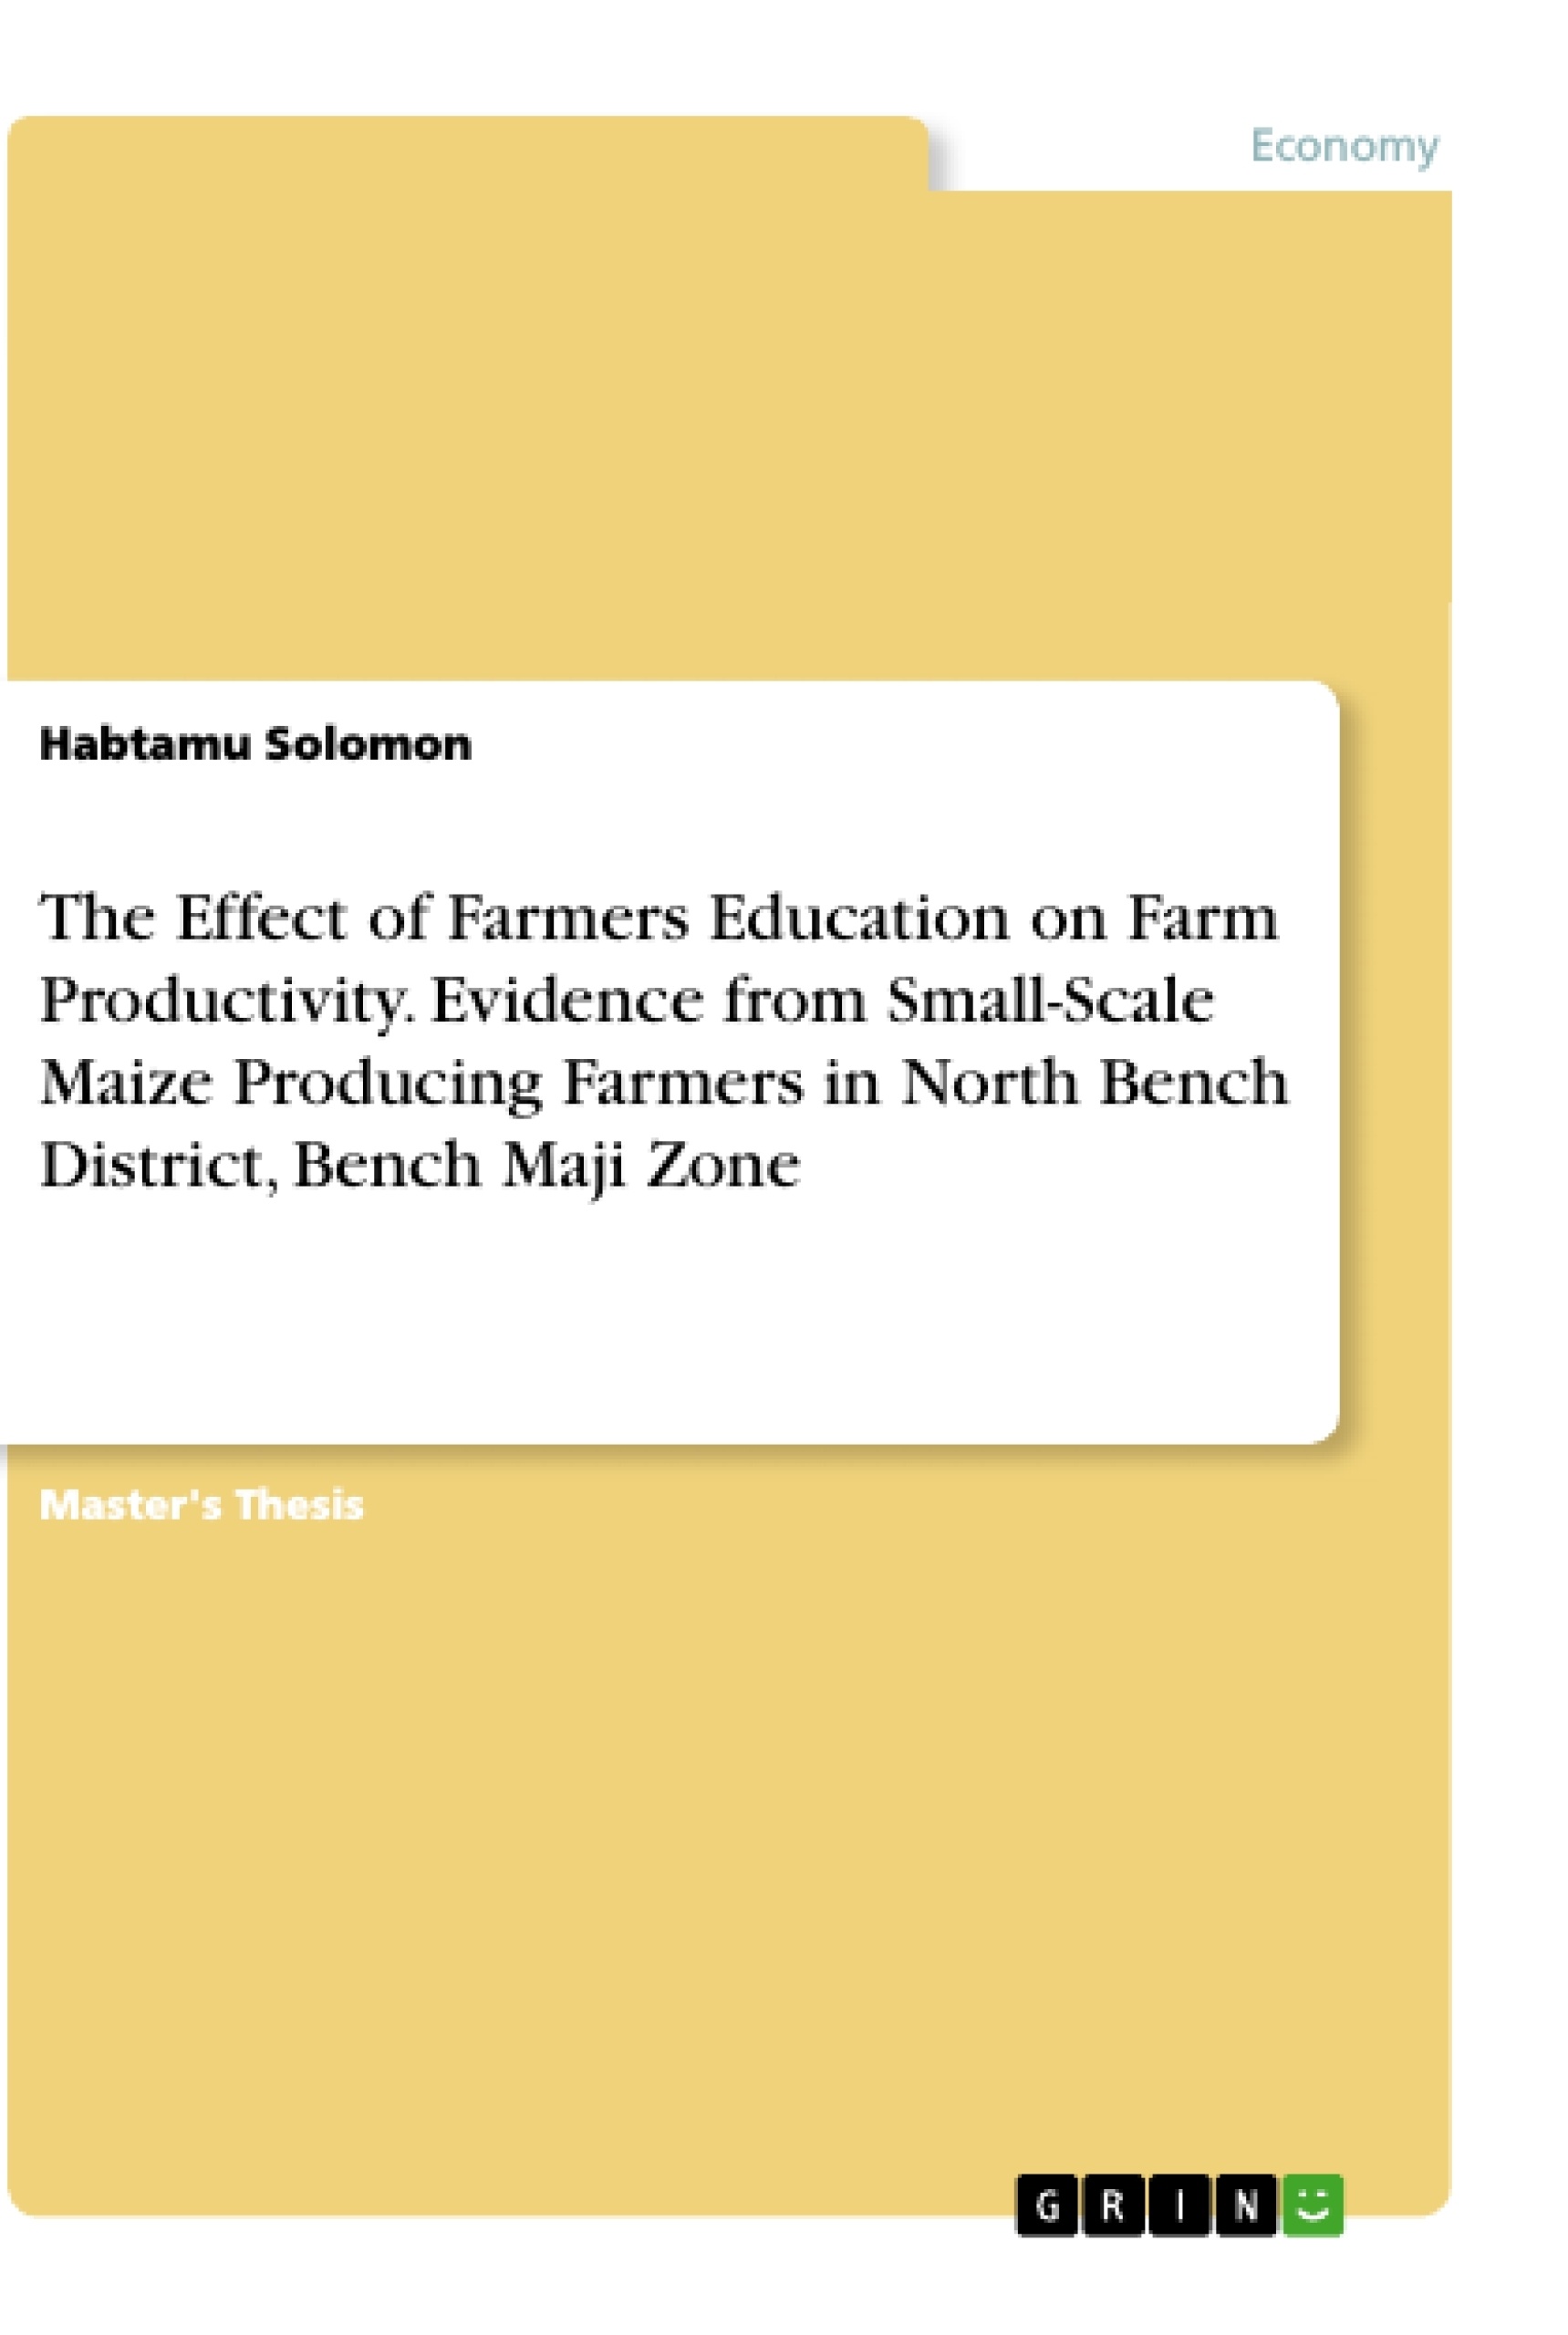 Title: The Effect of Farmers Education on Farm Productivity. Evidence from Small-Scale Maize Producing Farmers in North Bench District, Bench Maji Zone